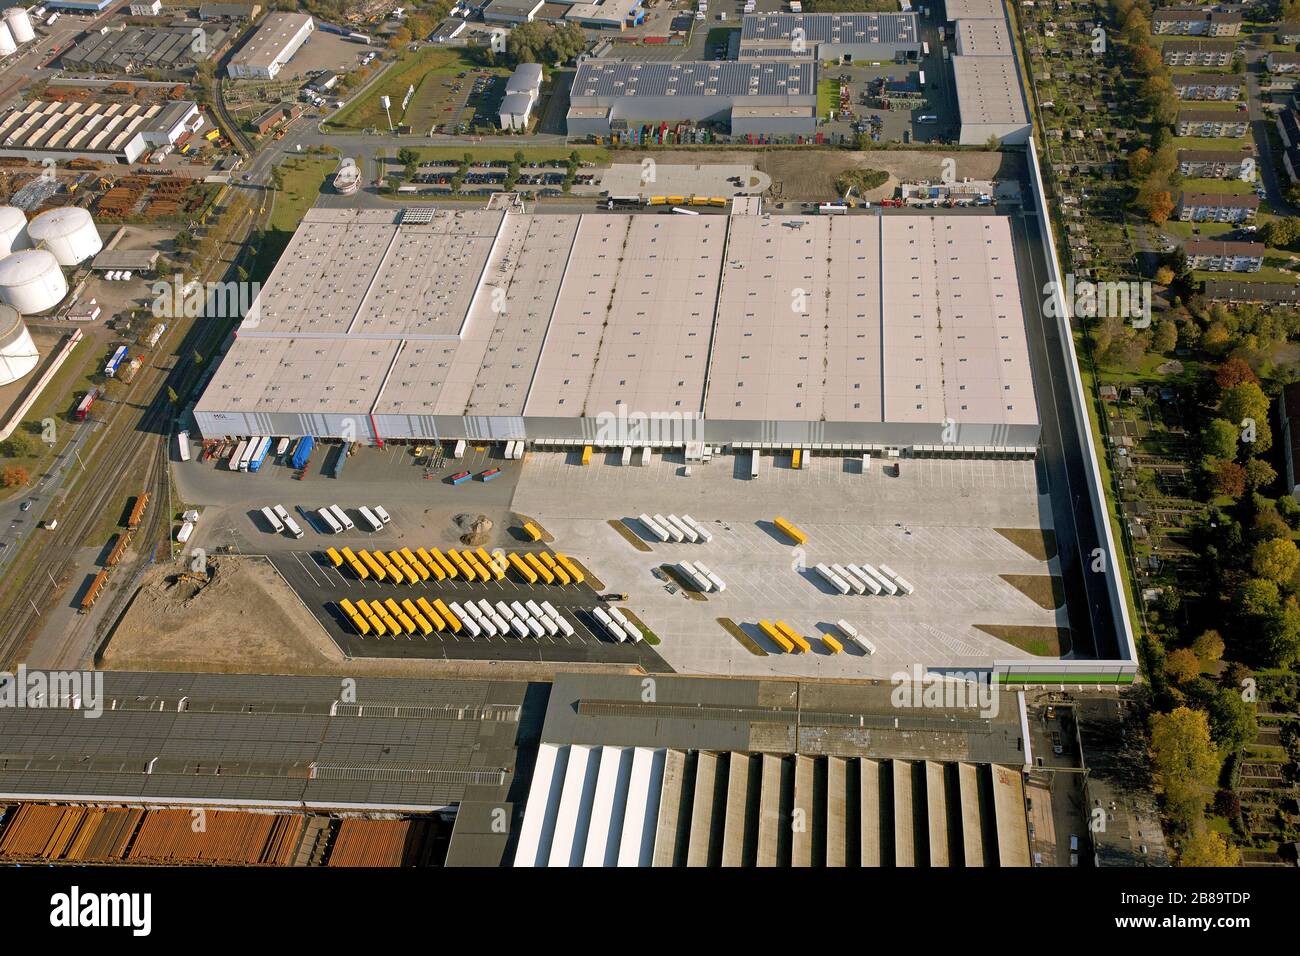 Aerial Photo Of Hamm High Resolution Stock Photography and Images - Alamy